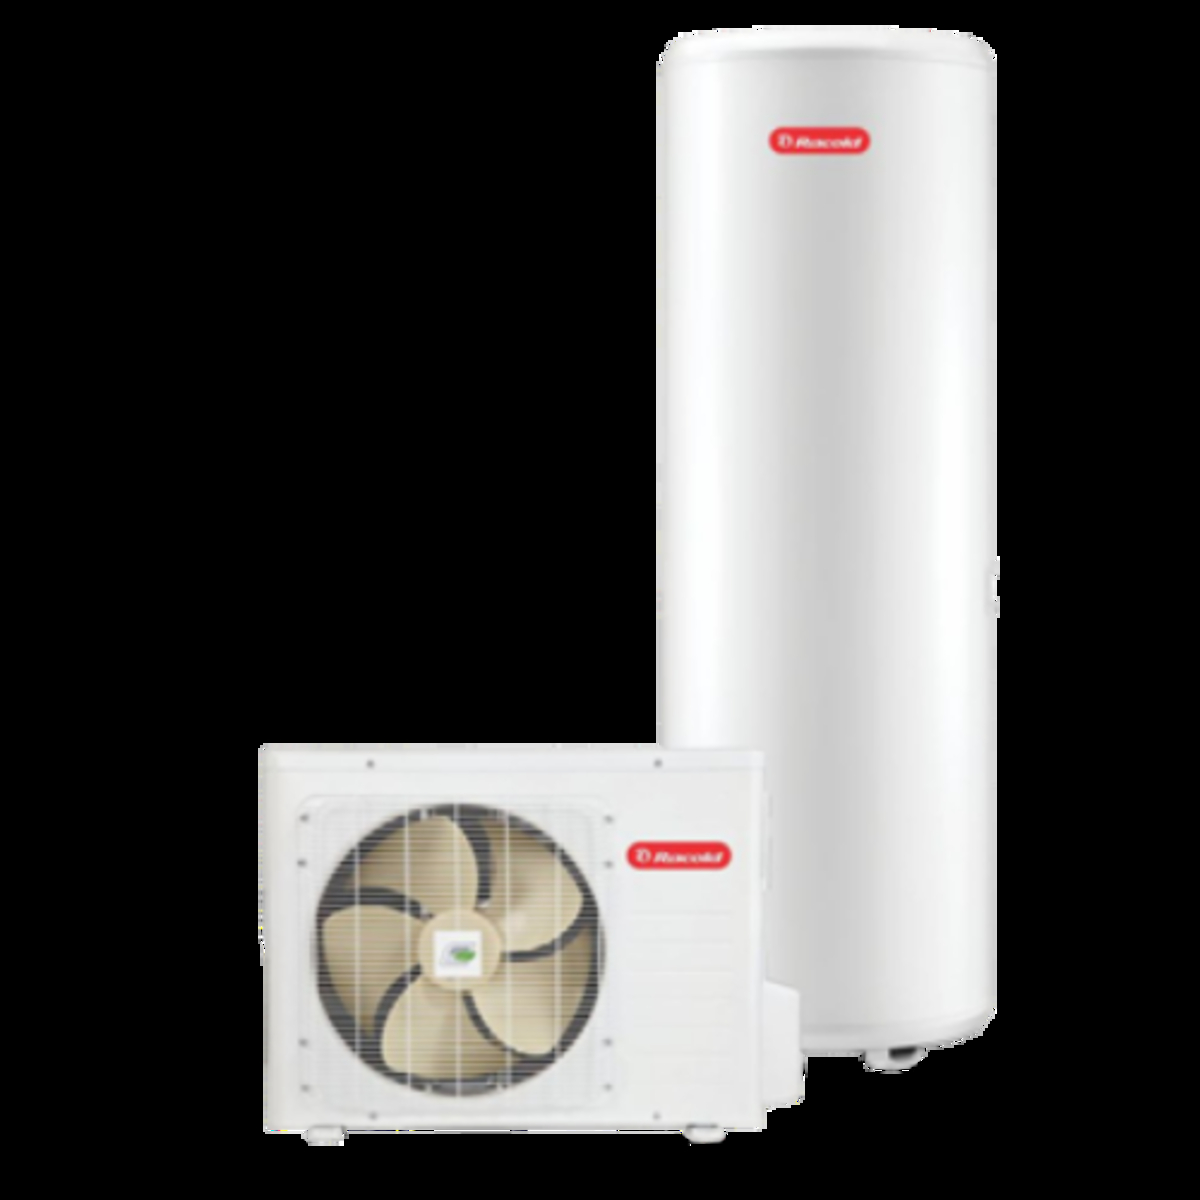 Racold heat pump for water heating